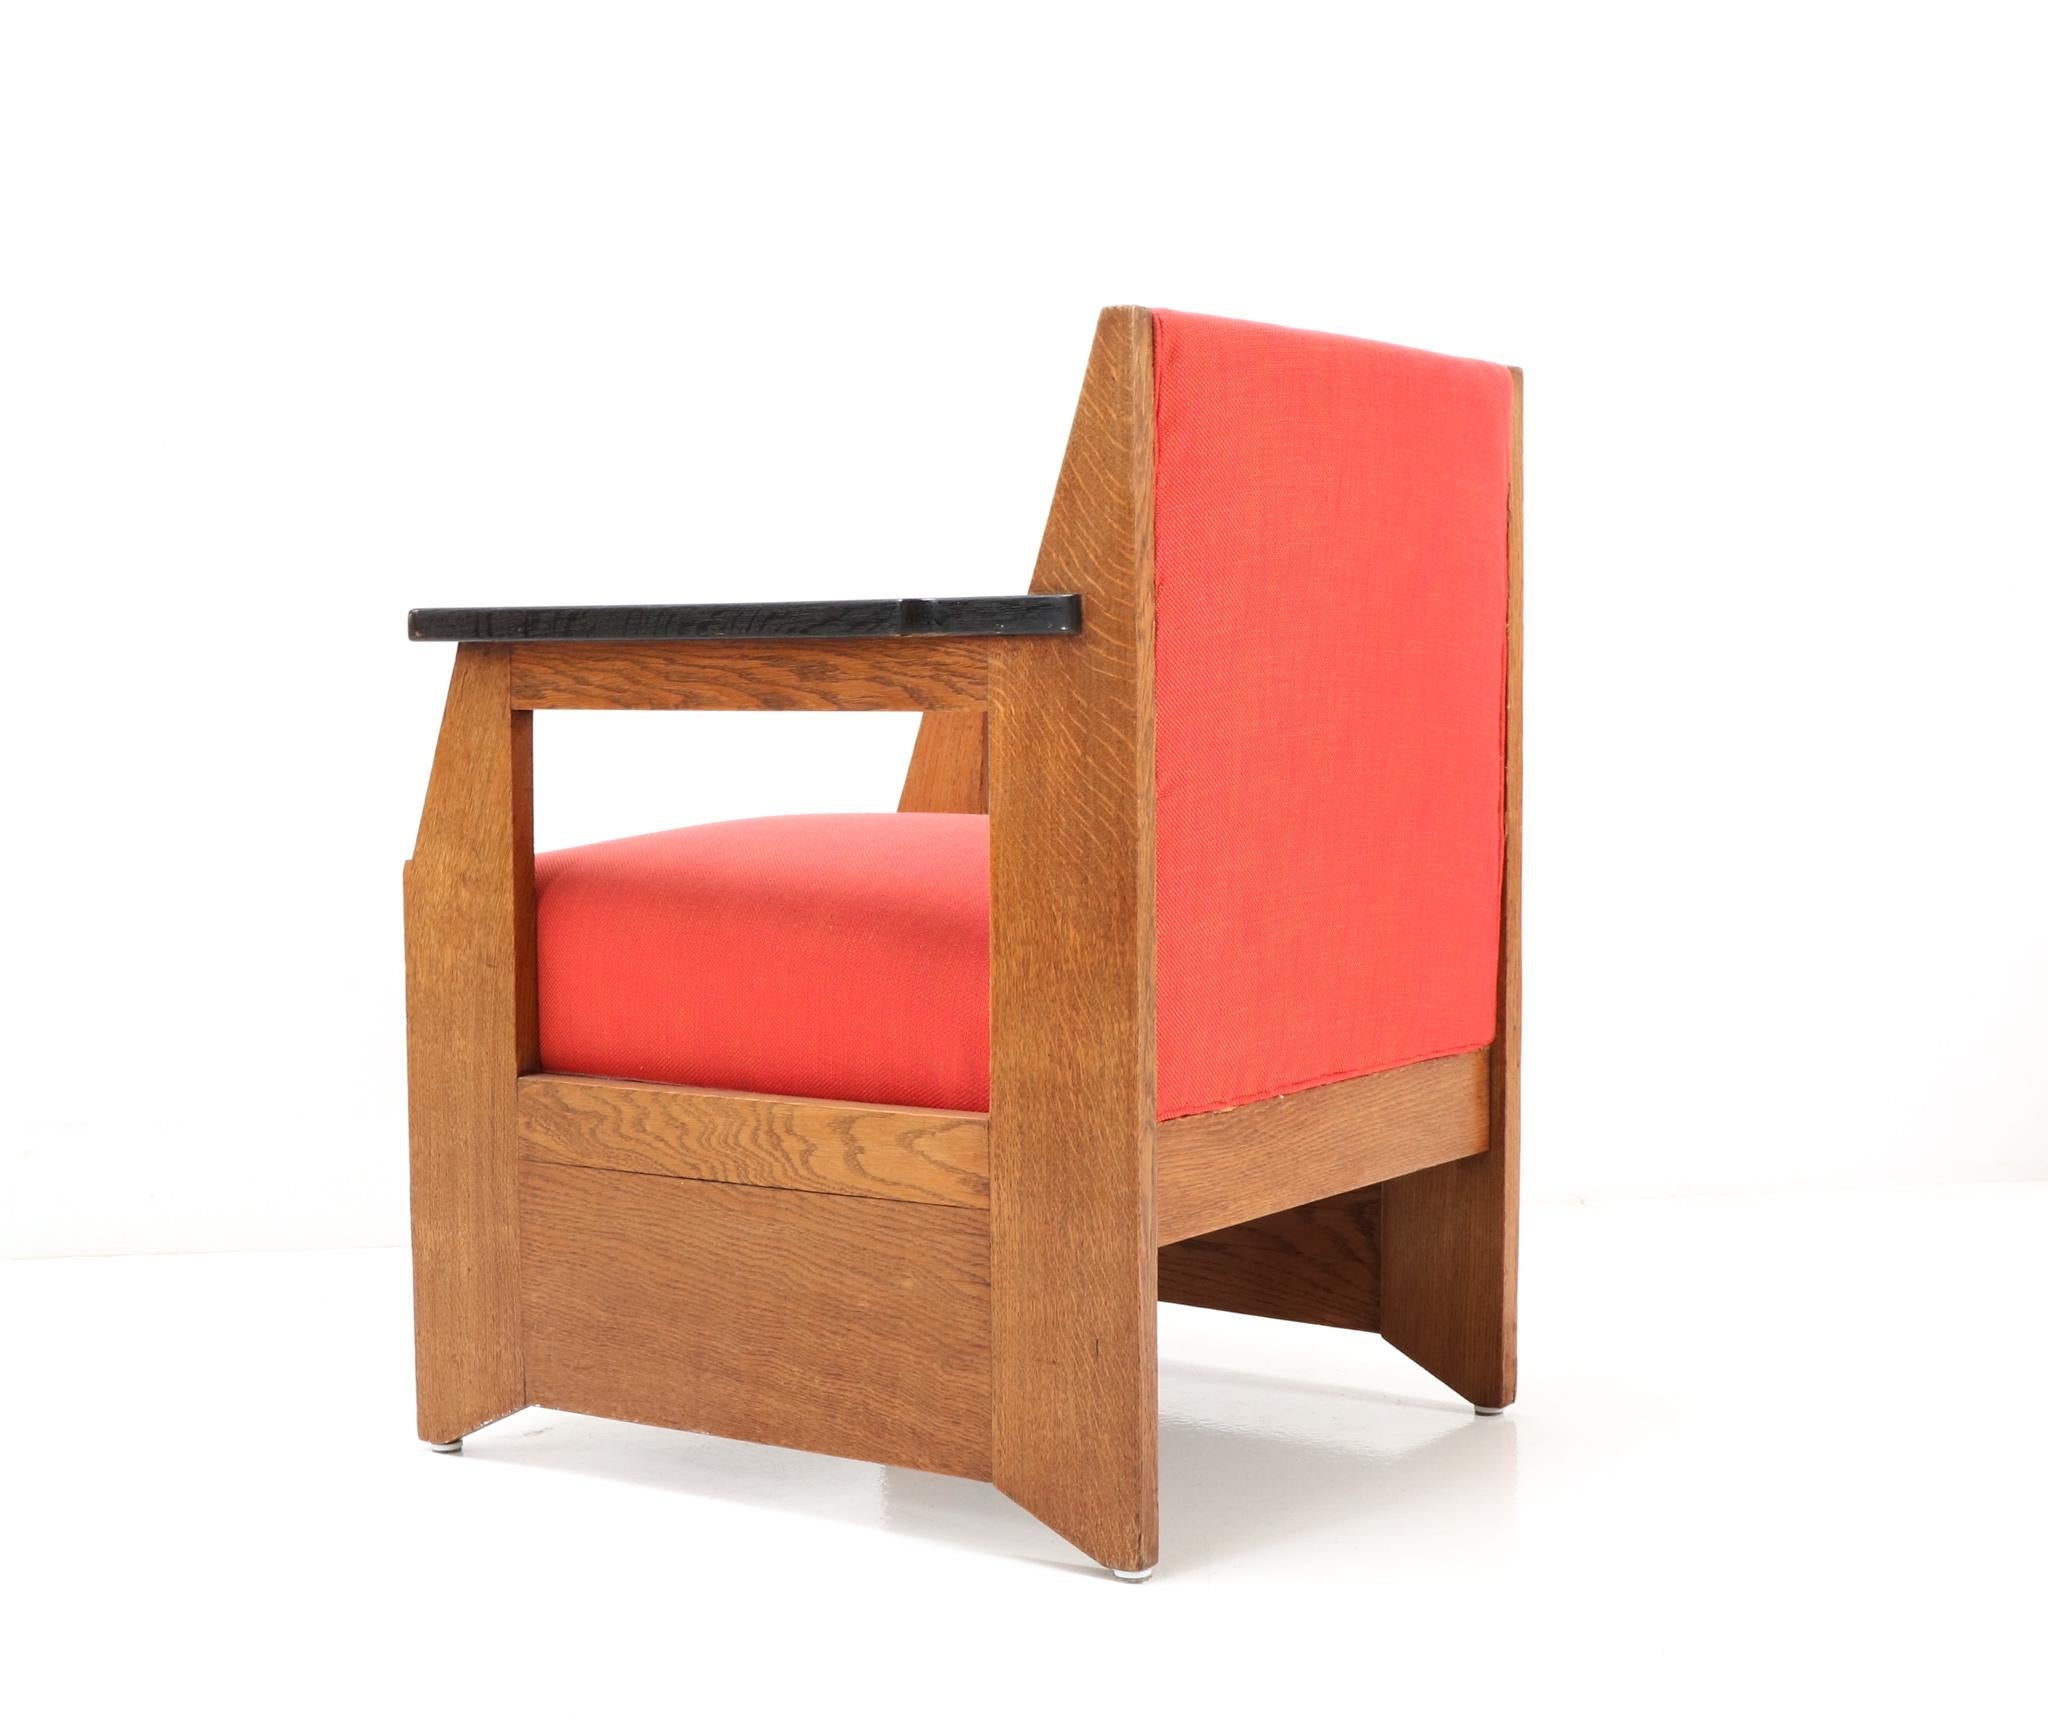 Pair of Oak Art Deco Modernist Easy Chairs by Hendrik Wouda for Pander, 1924 For Sale 1